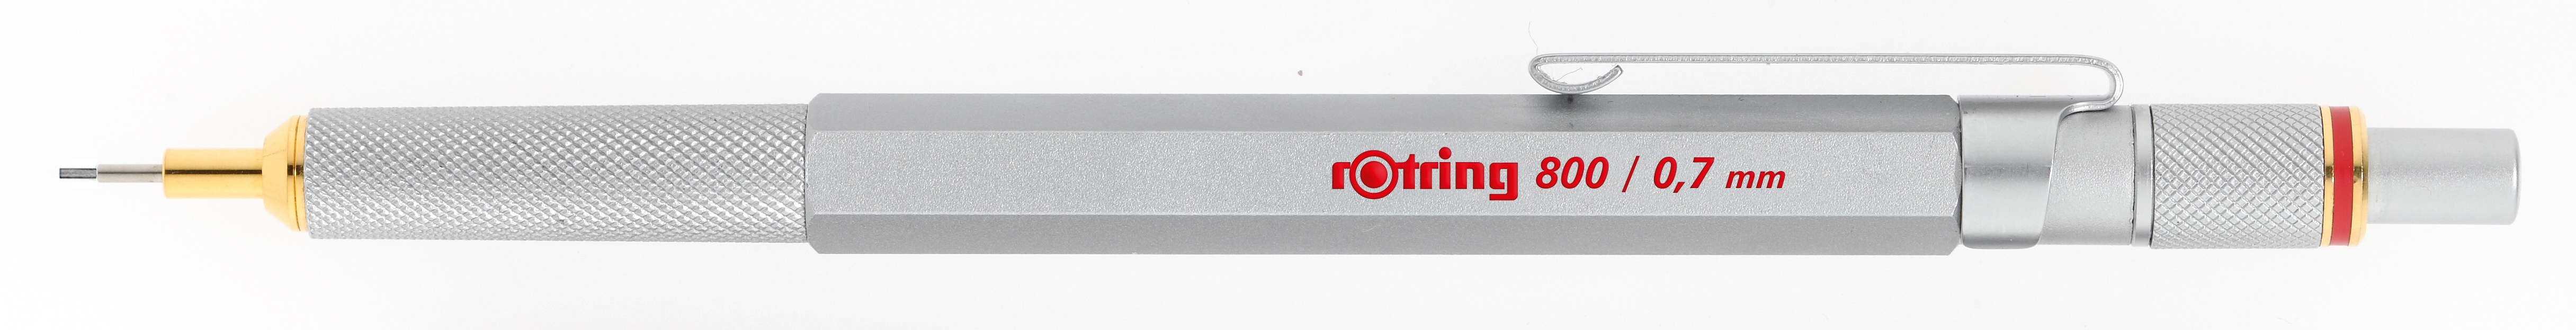 ROTRING Porte-mines 0,7mm 1904448 argent argent